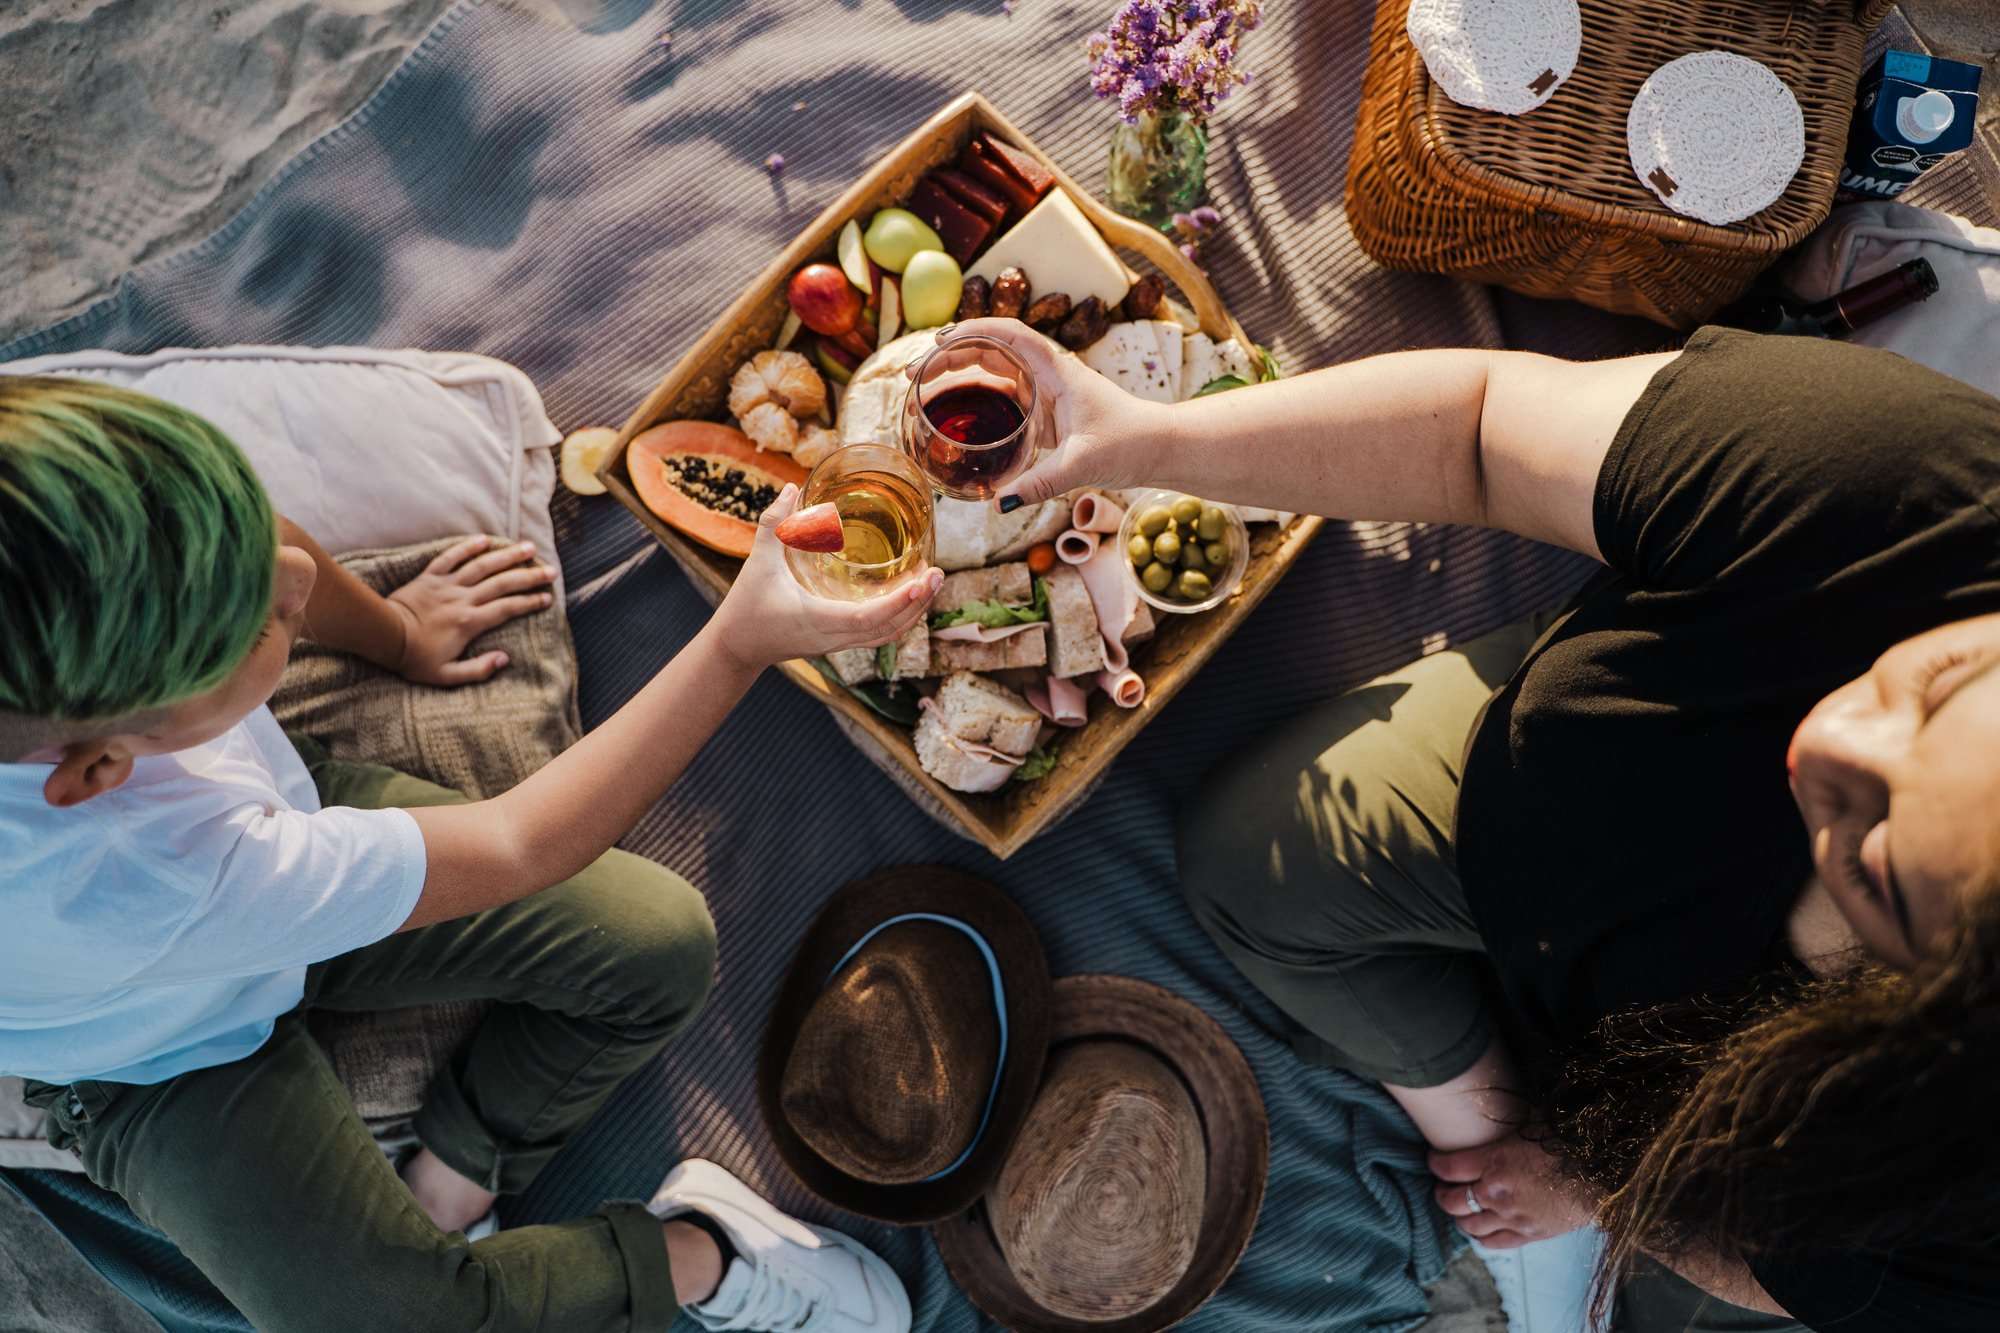 Person Holding Brown Wooden Tray With Food Bc915c05c2061f019bde0147751cbd9e 2000Catered Picnics: How To Plan The Perfect Summer Picnic